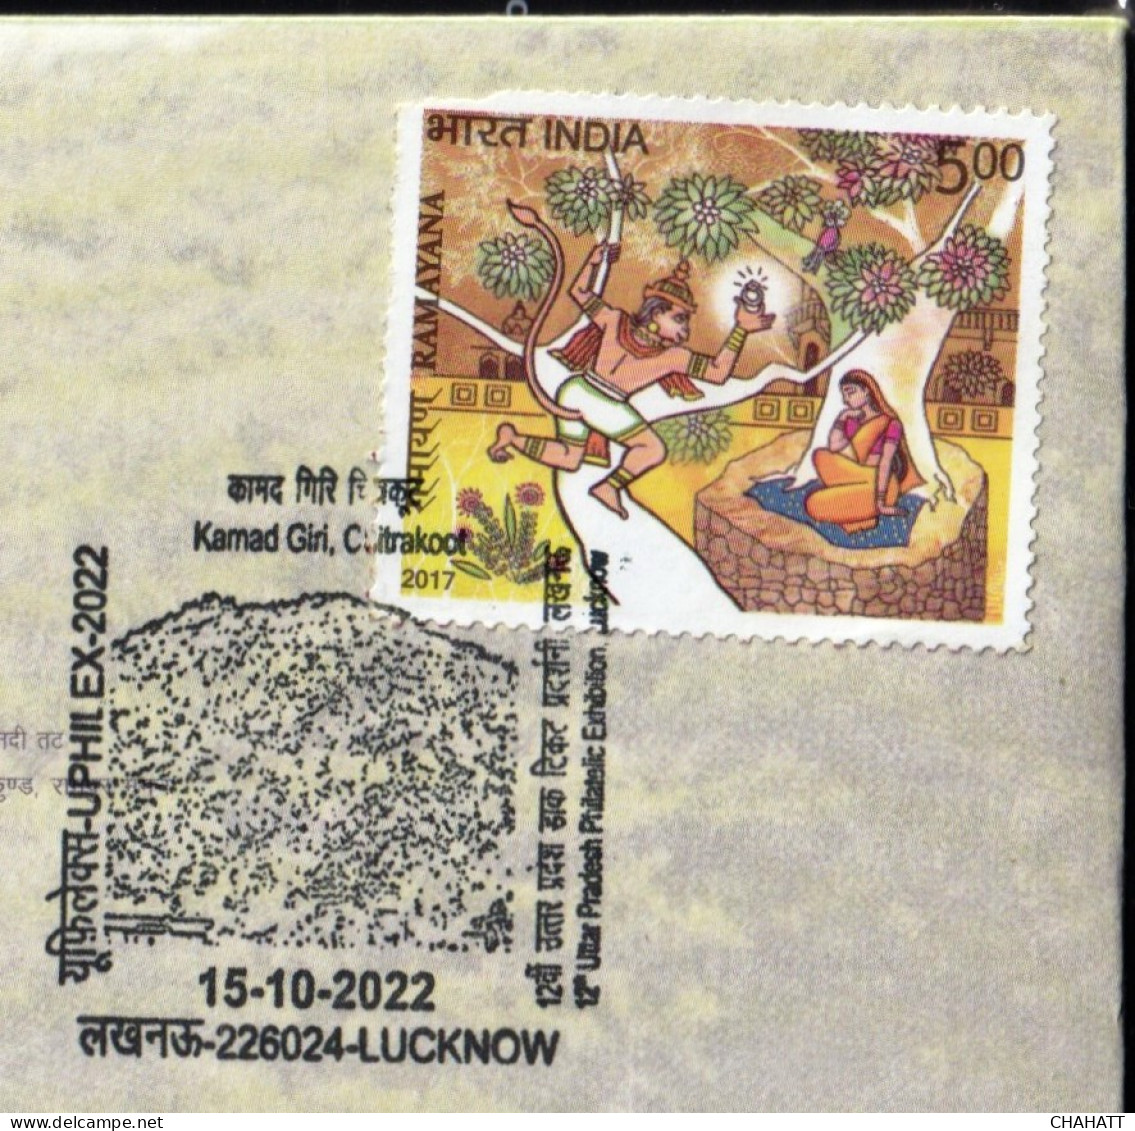 HINDUISM - RAMAYAN- KAMAD GIRI, FOREST HILLS OF CHITRAKOOT-PICTORIAL CANCELLATION - SPECIAL COVER - INDIA -2022- BX4-23 - Induismo